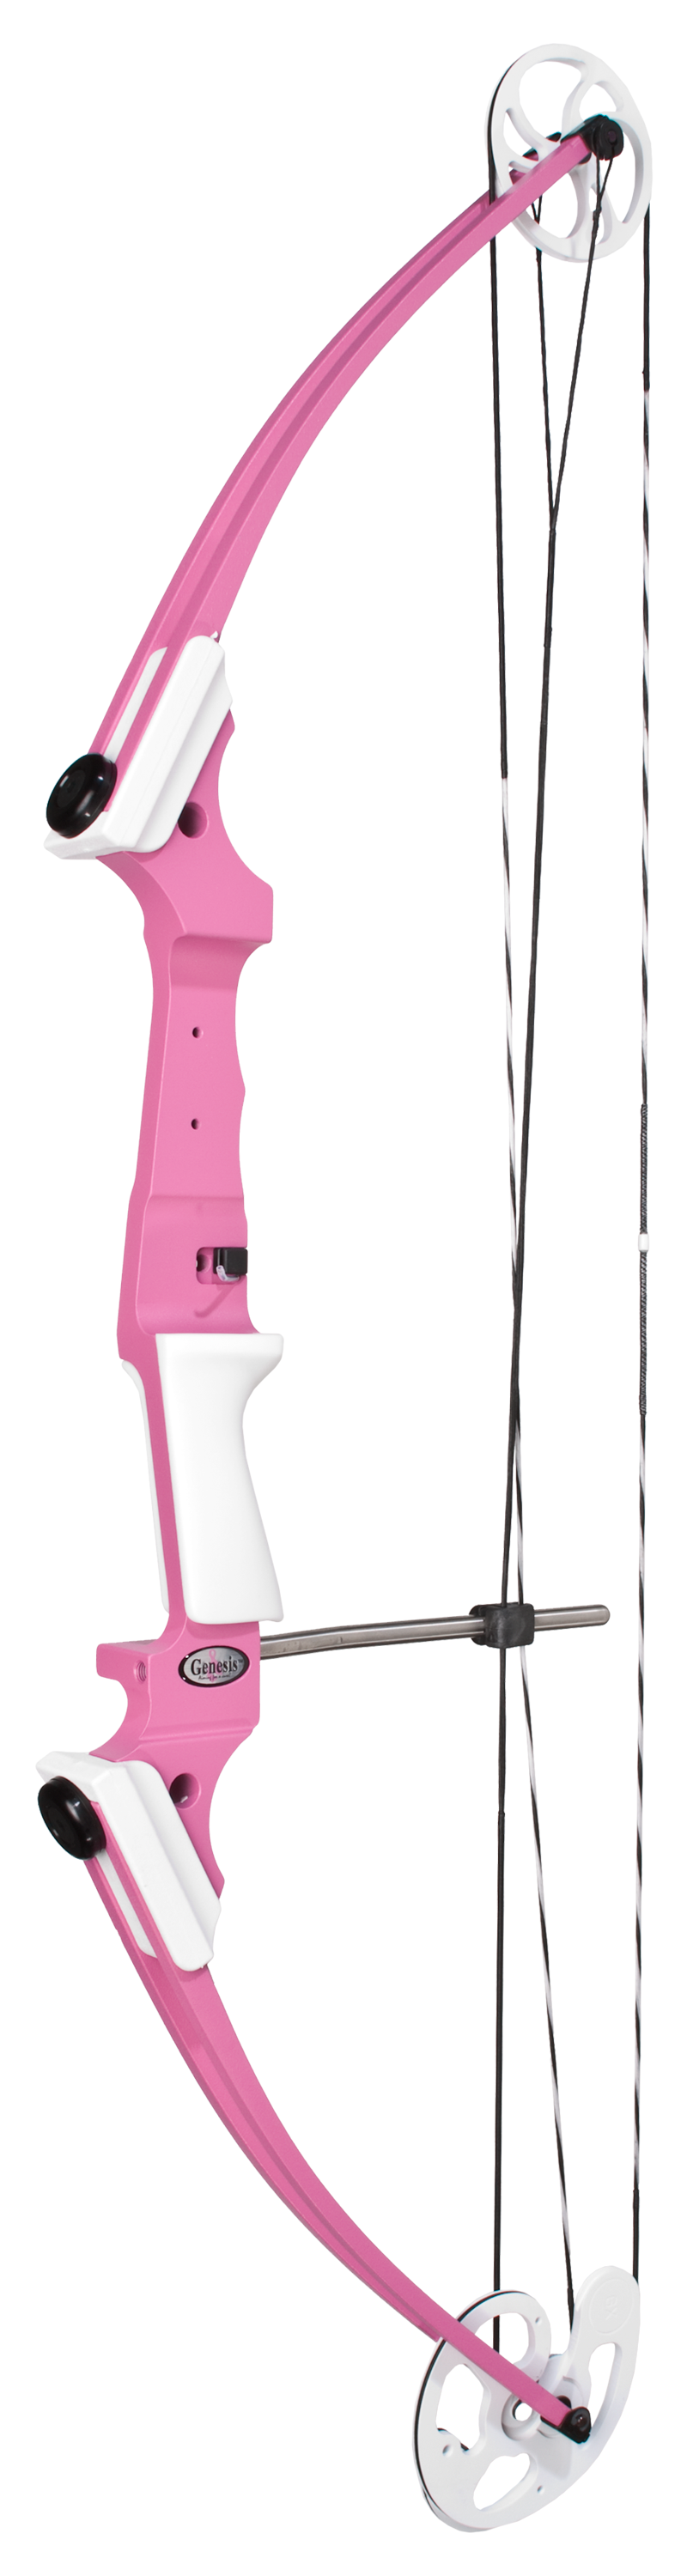 Genesis Compound Bow Package - Pink Lemonade - Right Hand